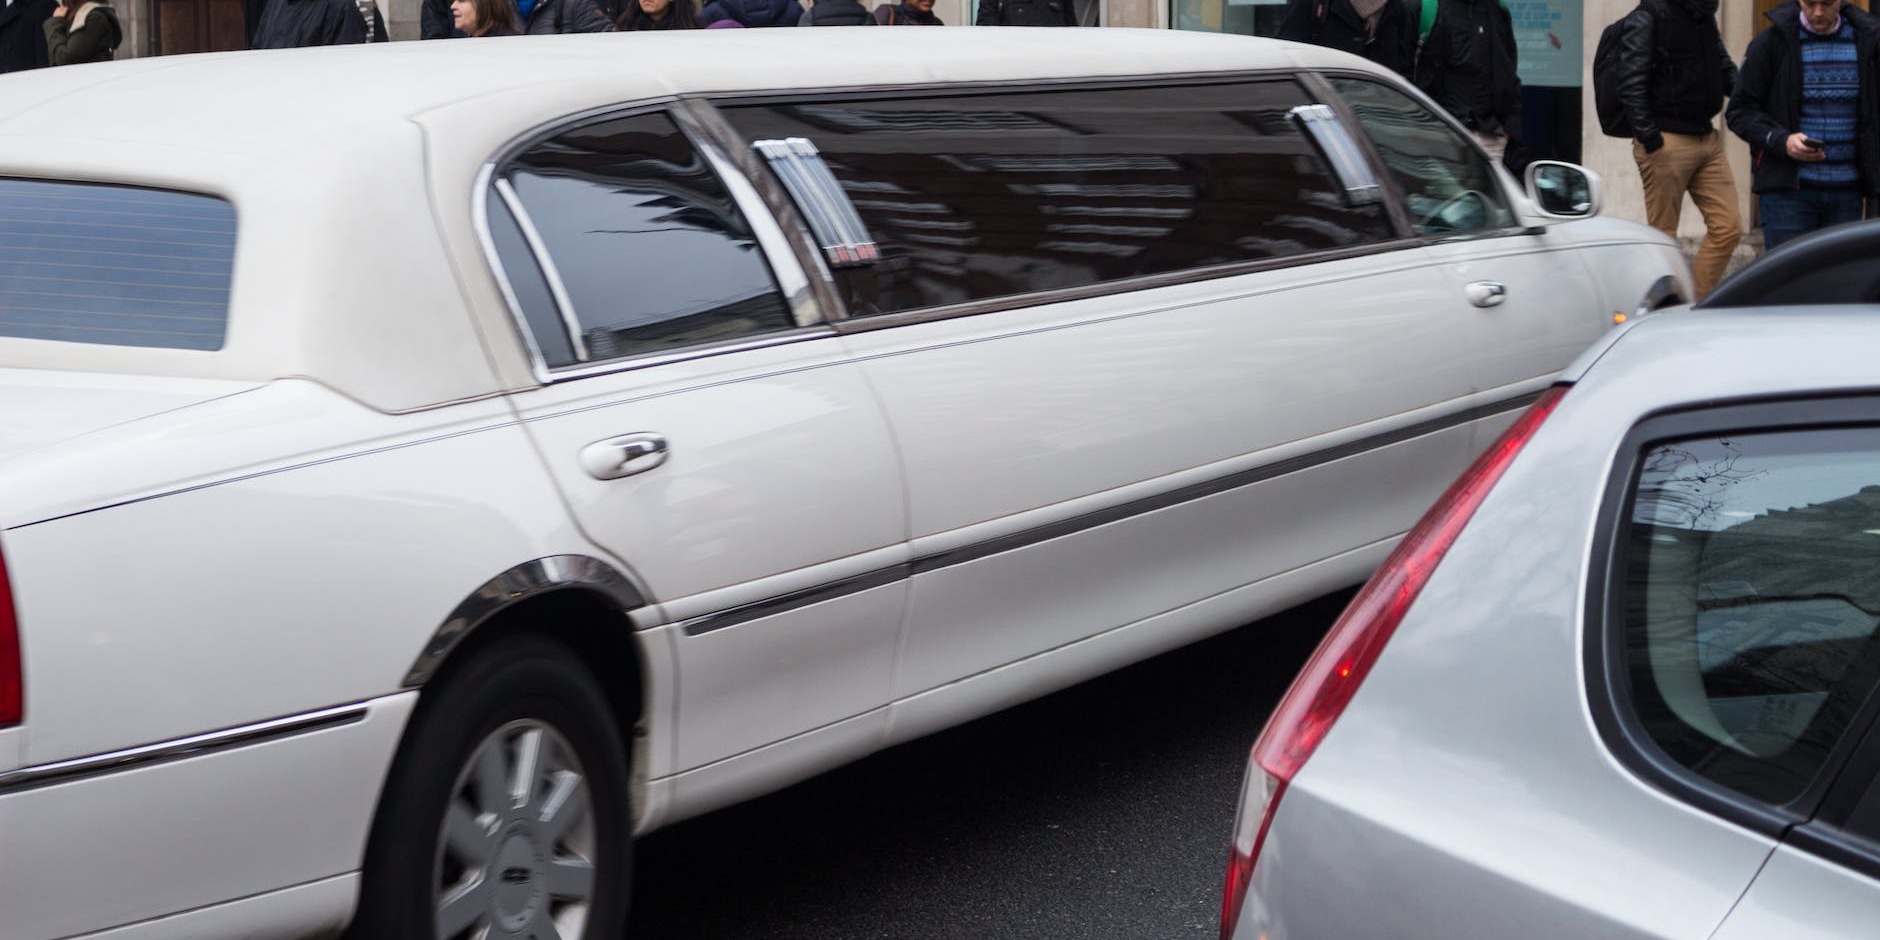 Is Premium Limo Hire Worth the Price? Evaluating Options Across the UK